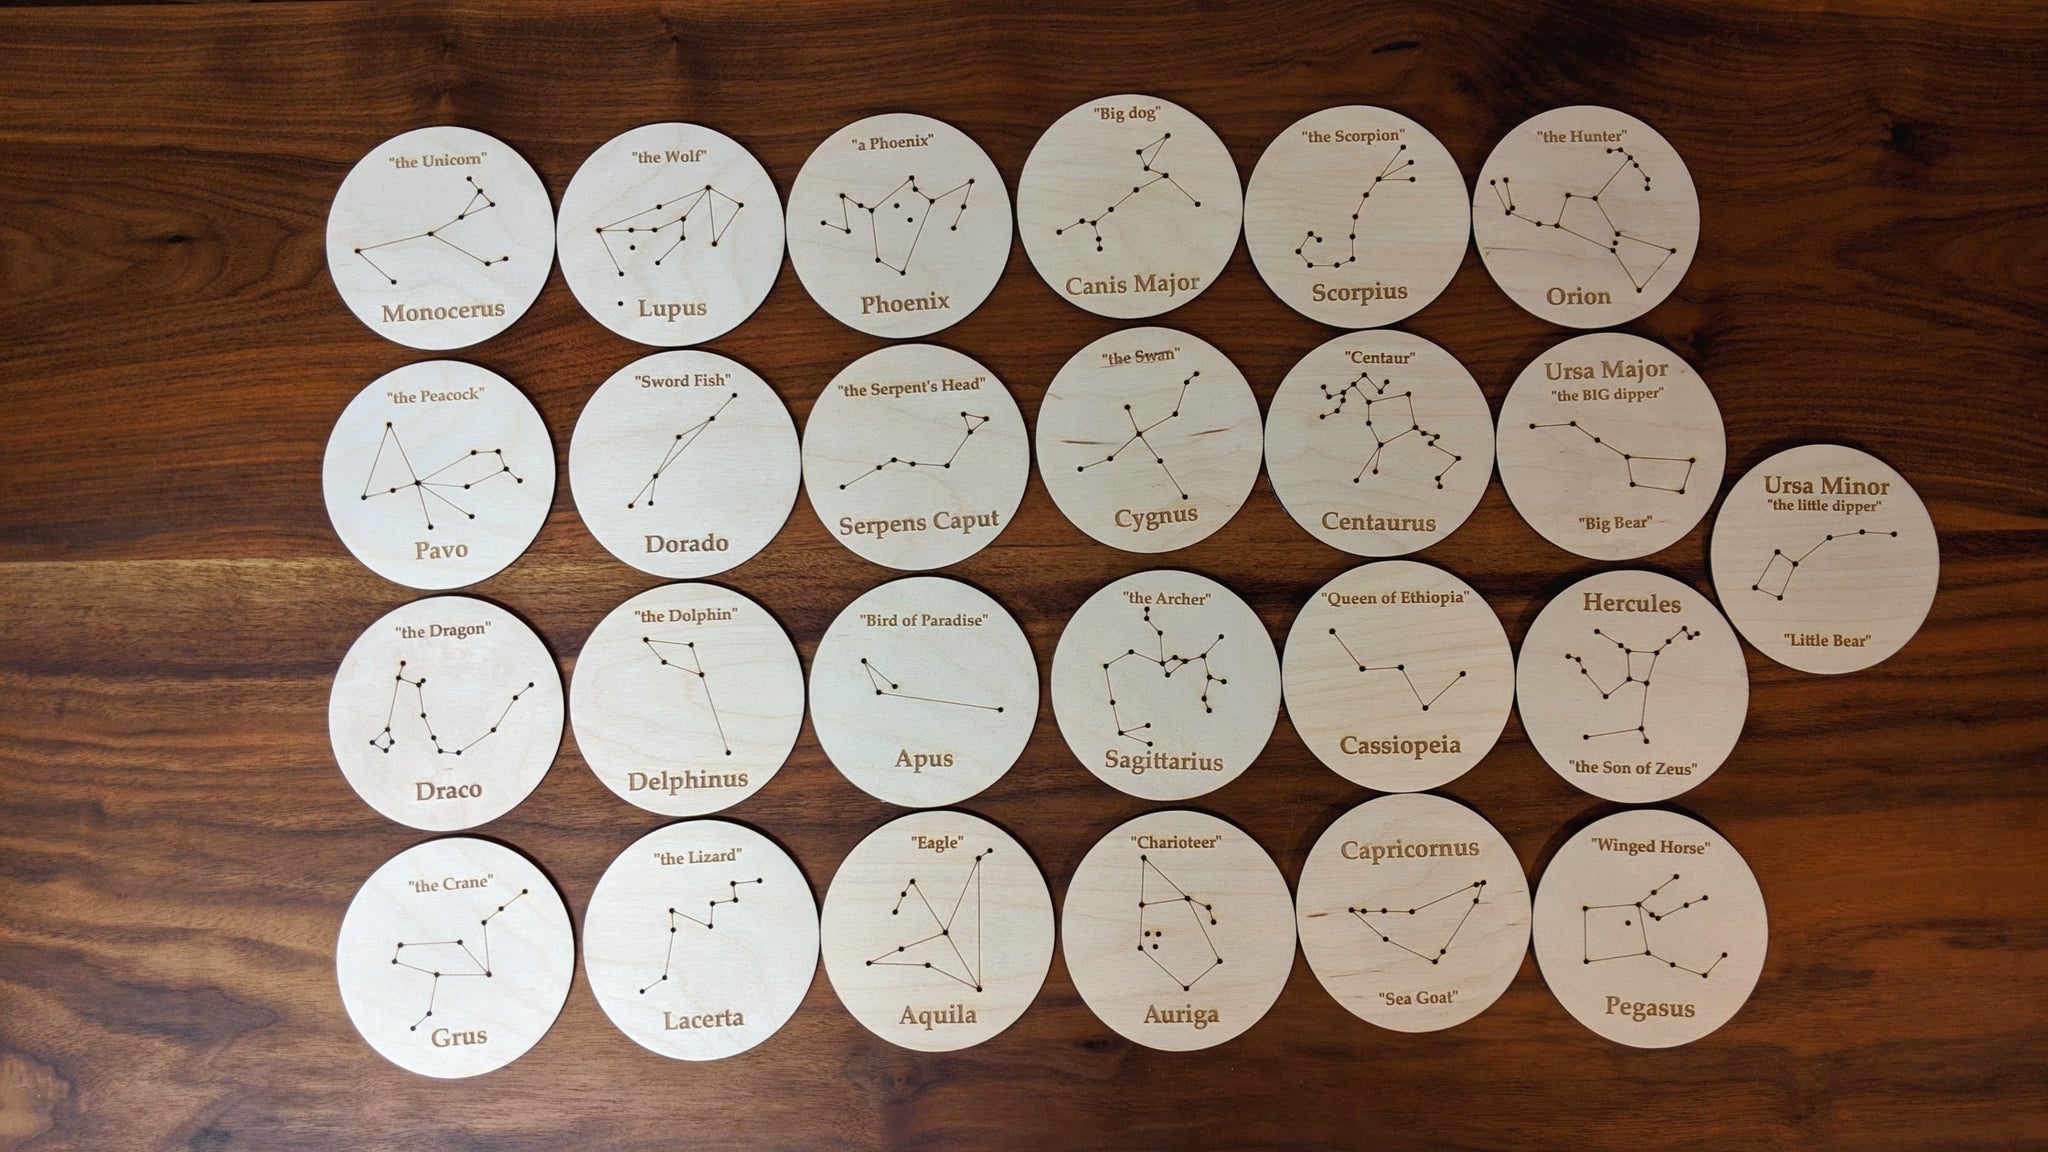 Download Constellation Coasters Designs - SVG - DXF - EPS (digital download) - Xykit